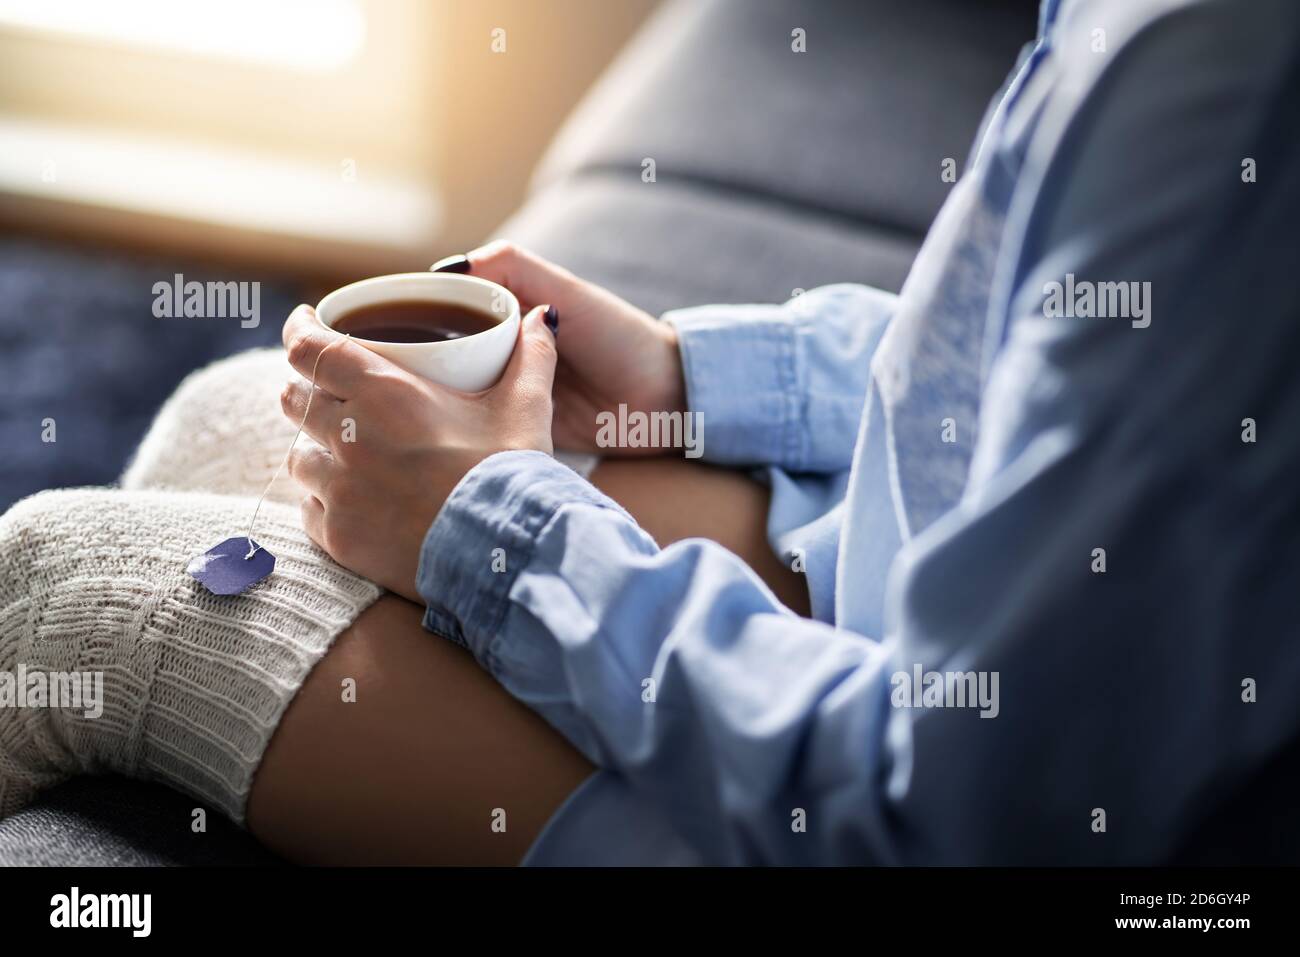 Cold winter morning comfort at home with warm tea. Happy woman holding hot cup. Sick person with flu or fever. Relaxing on comfy couch. Stock Photo